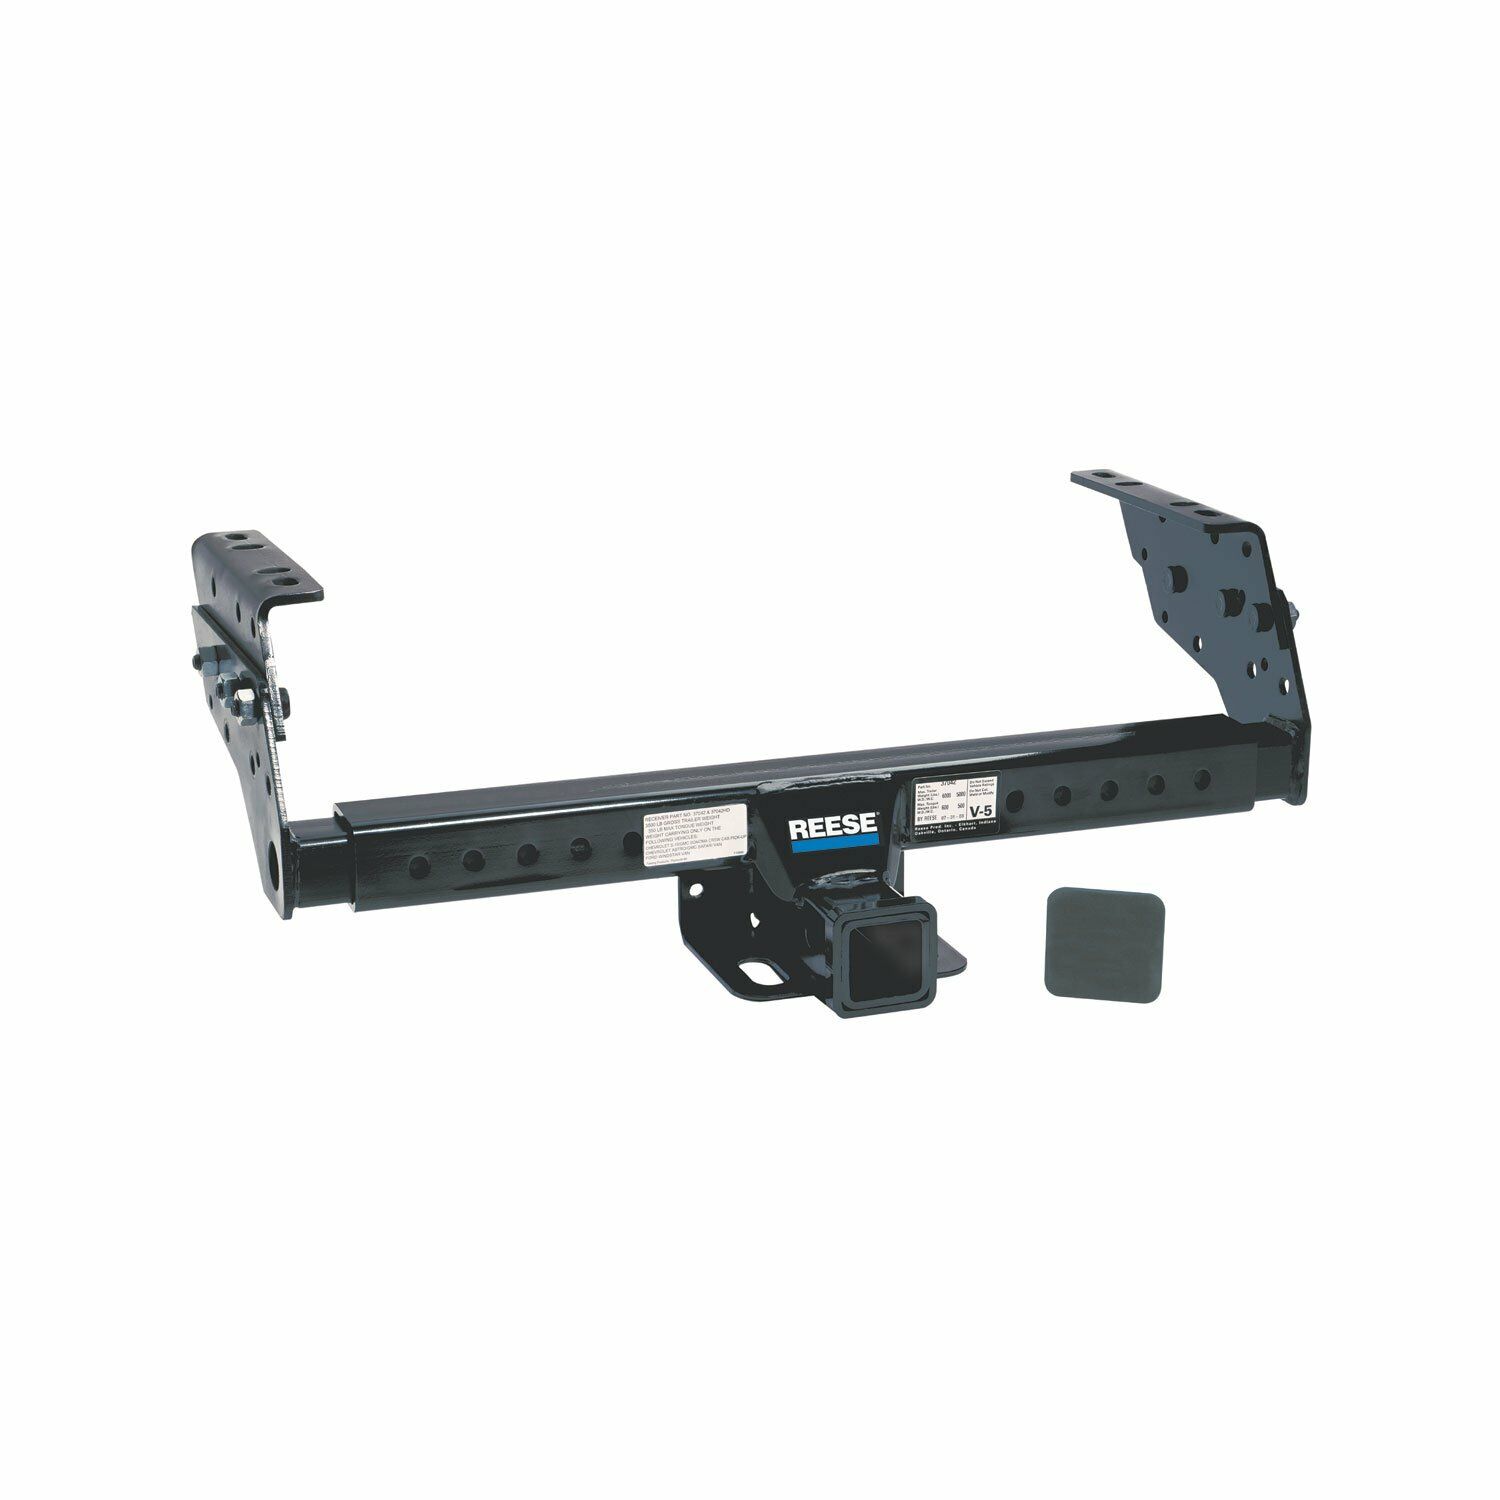 REESE Towpower Multi-Fit Trailer Hitch, Class III 37042